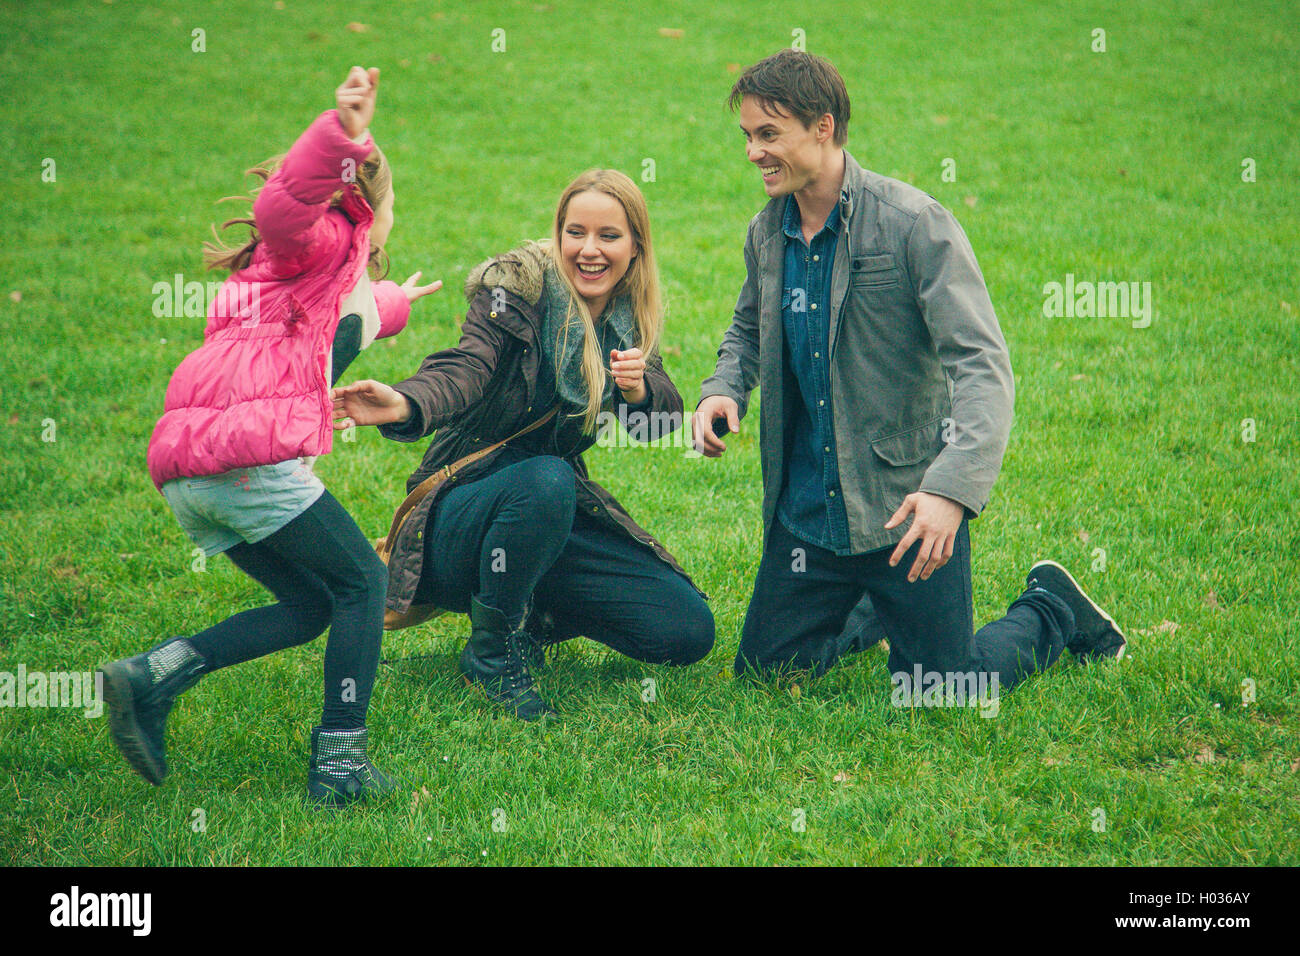 Family of three in park. Daughter cries close by to worried parents. Stock Photo